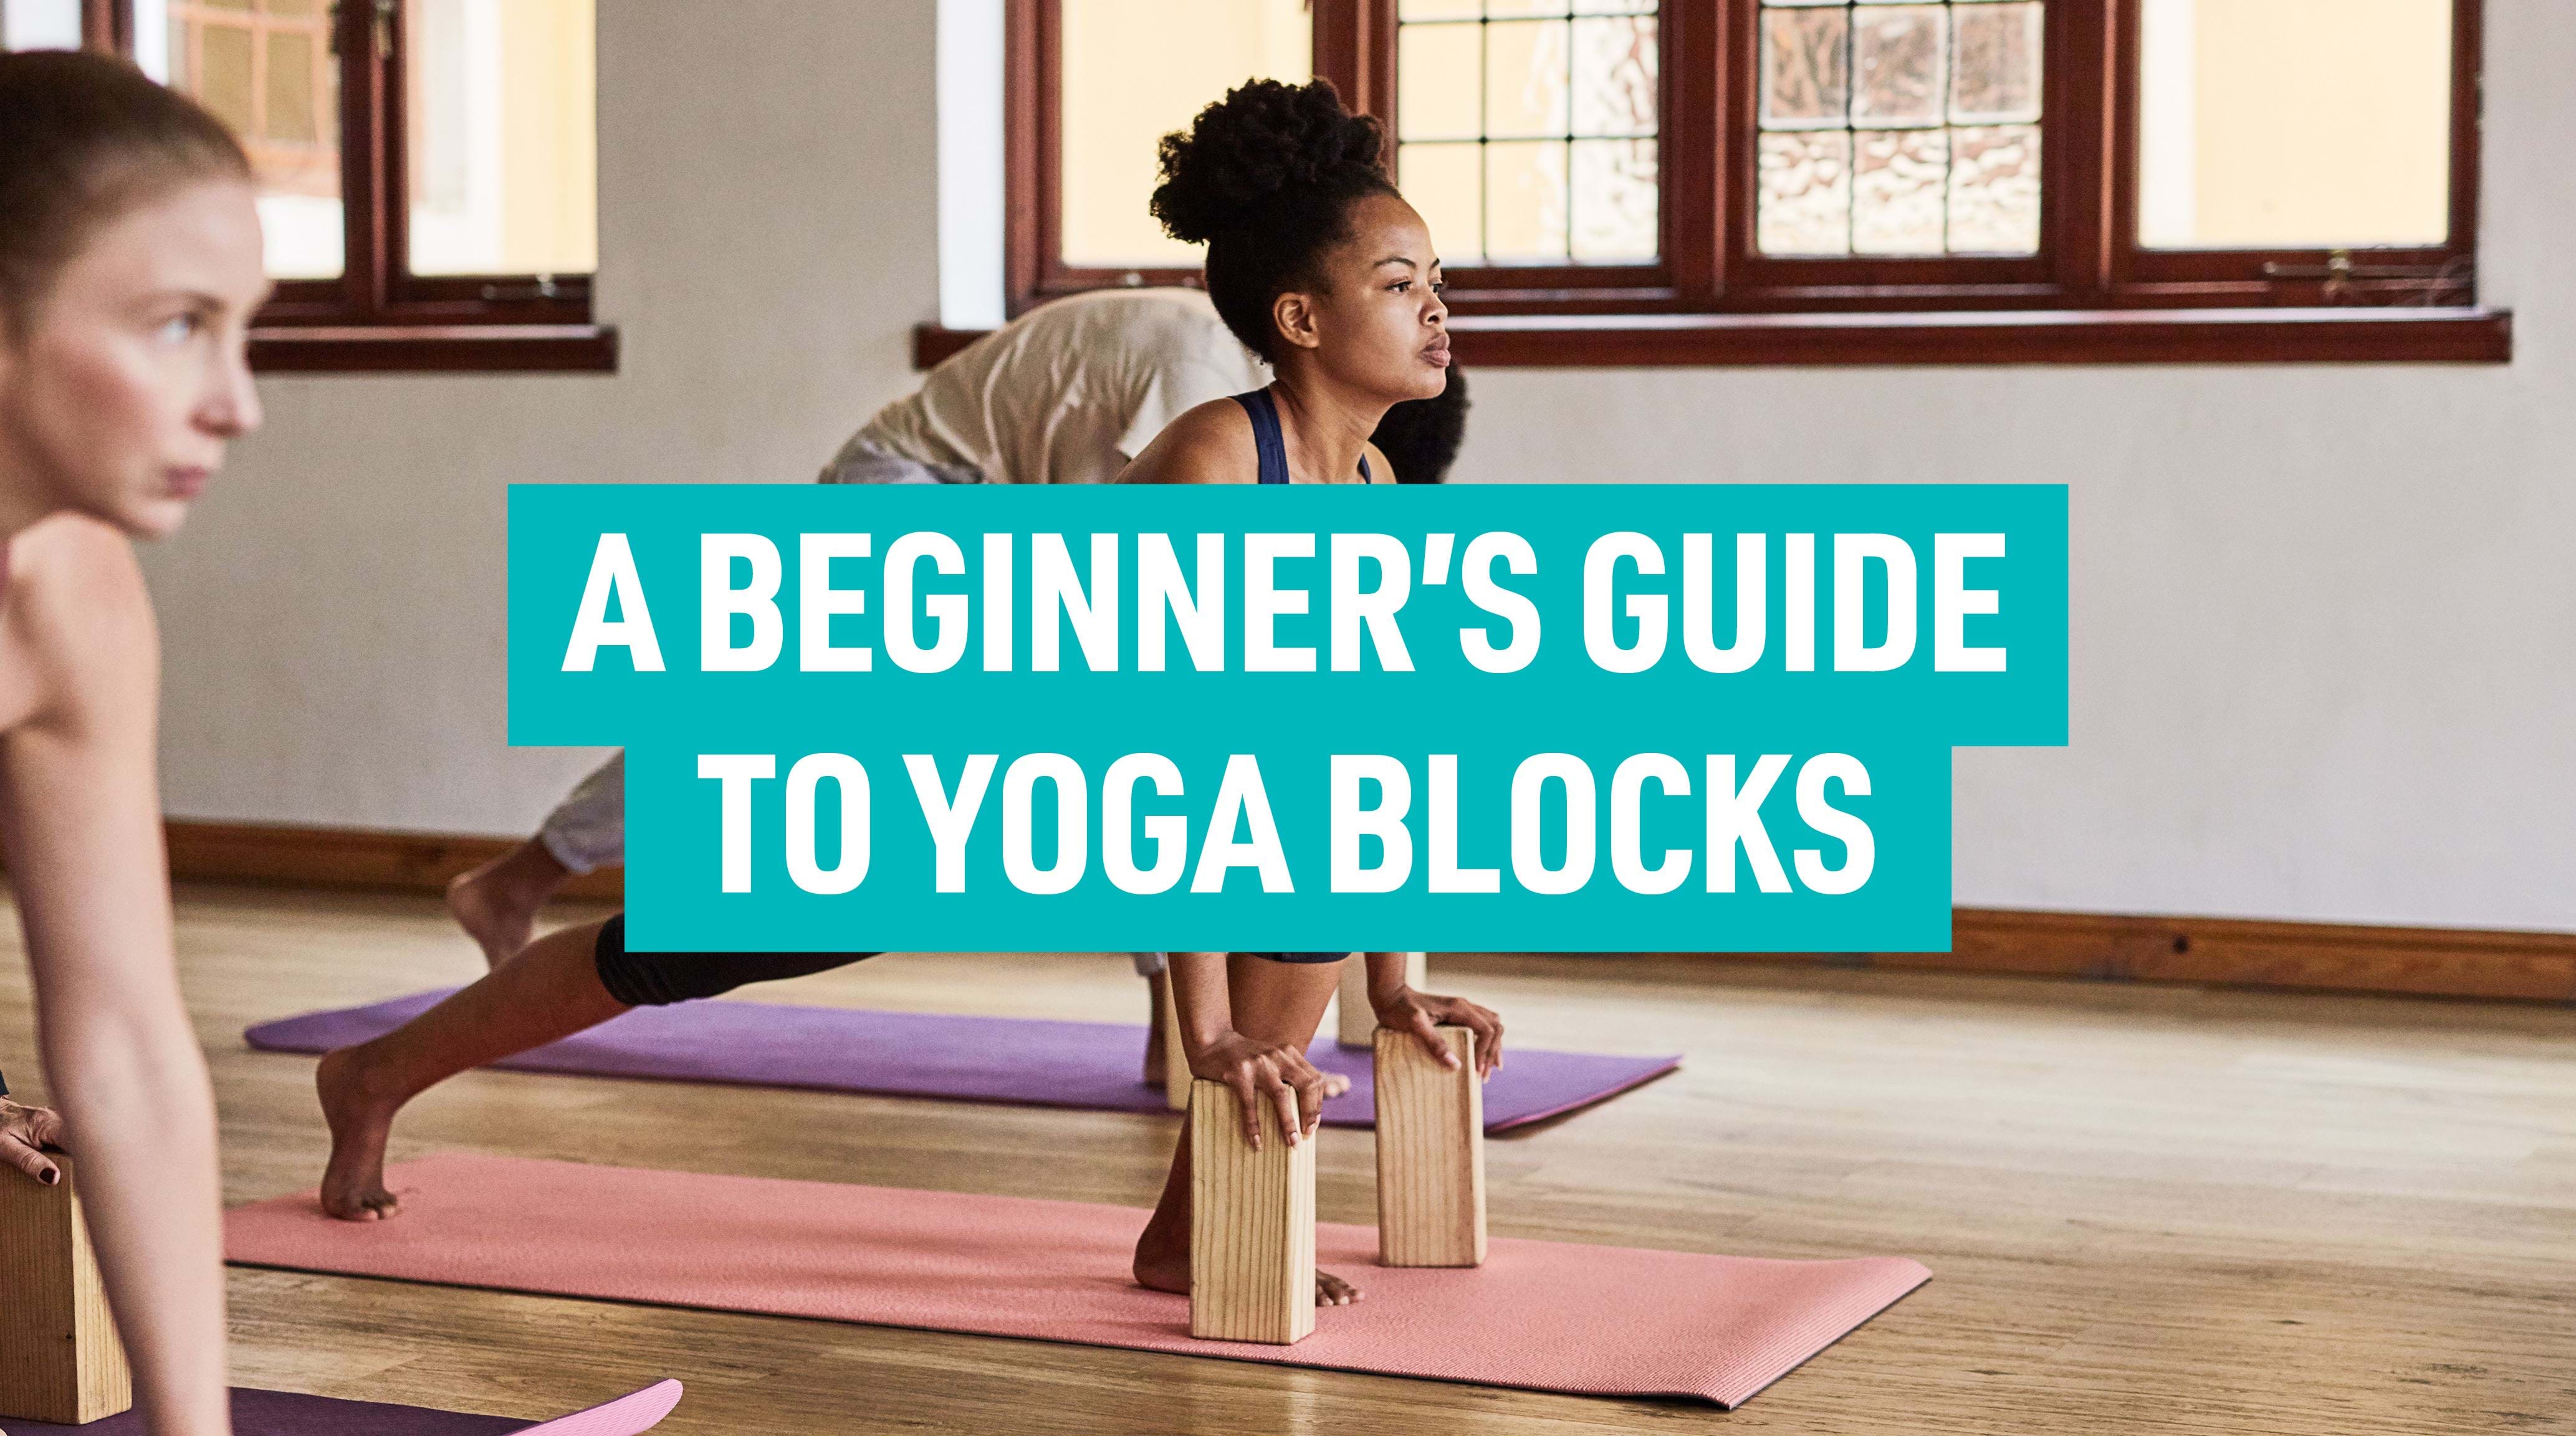 The Beginners Guide To Yoga Blocks